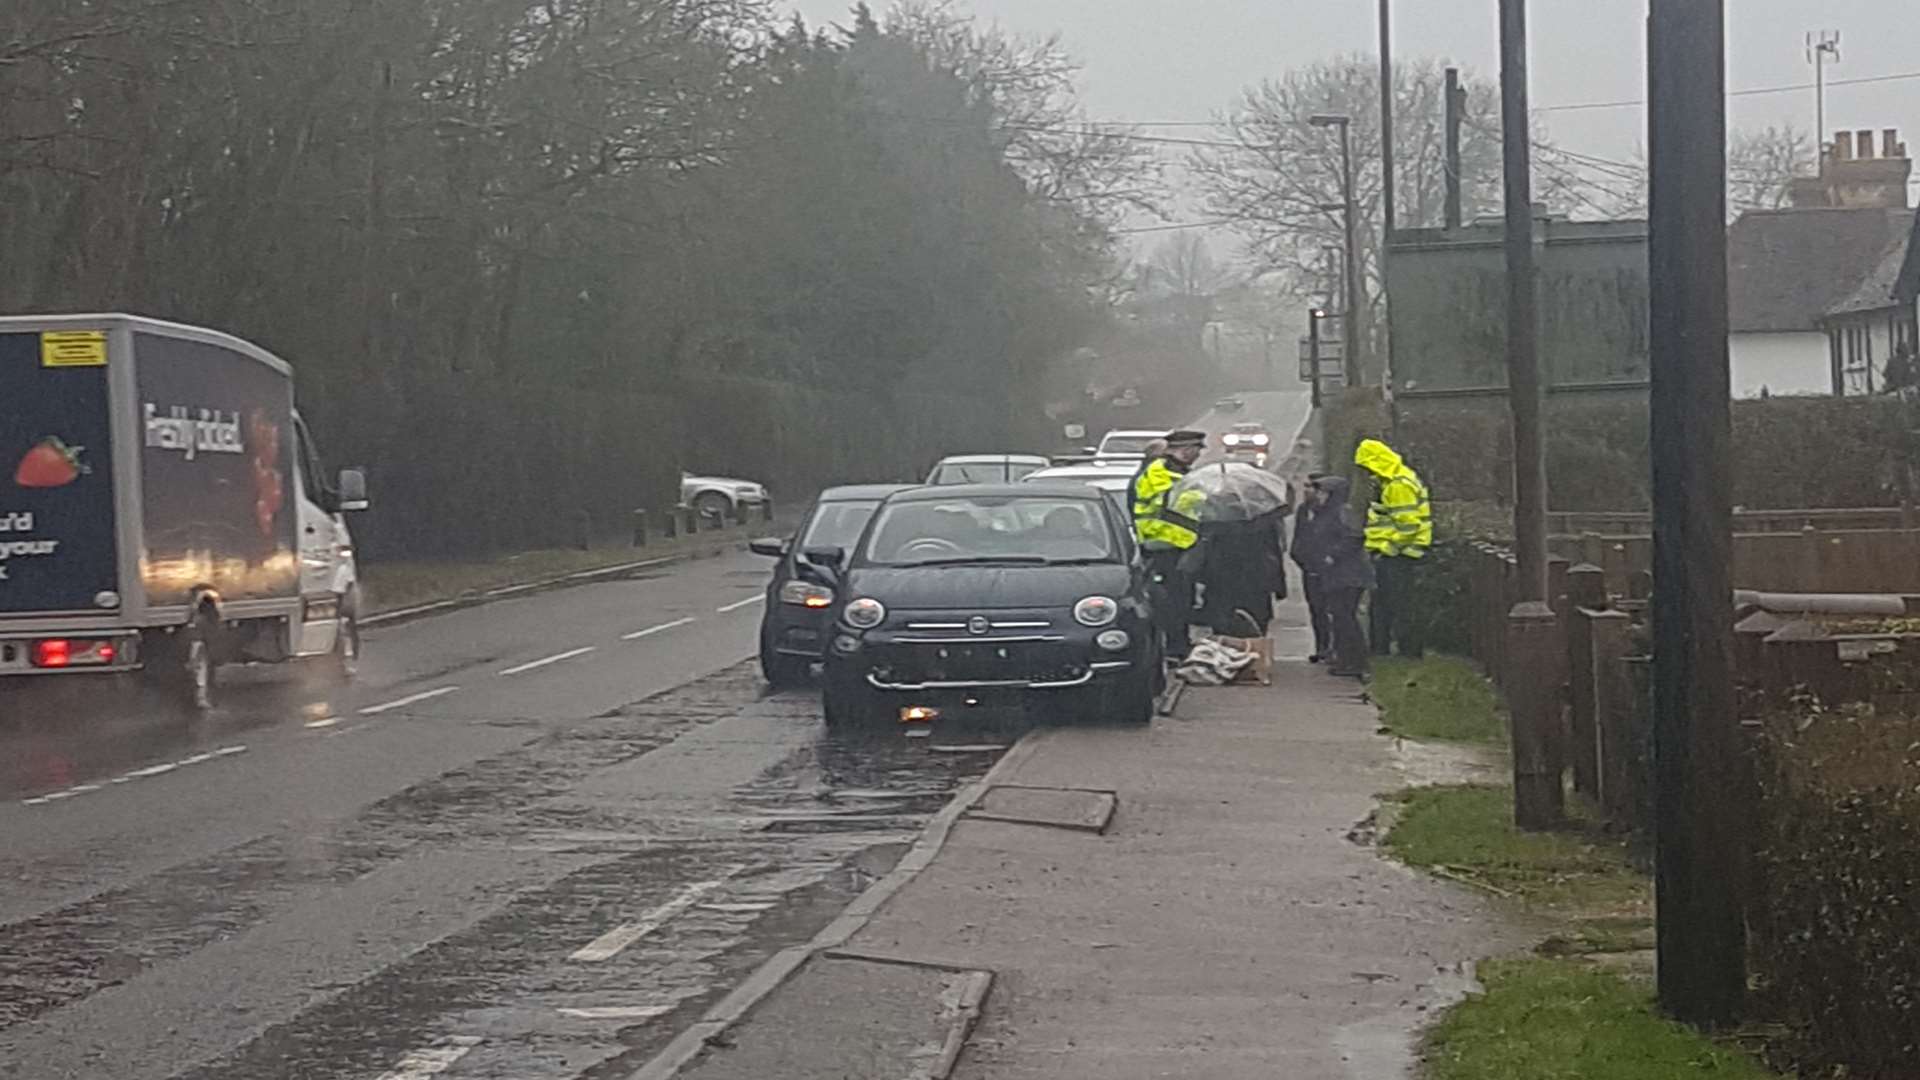 The crash, involving three cars, took place on the A229